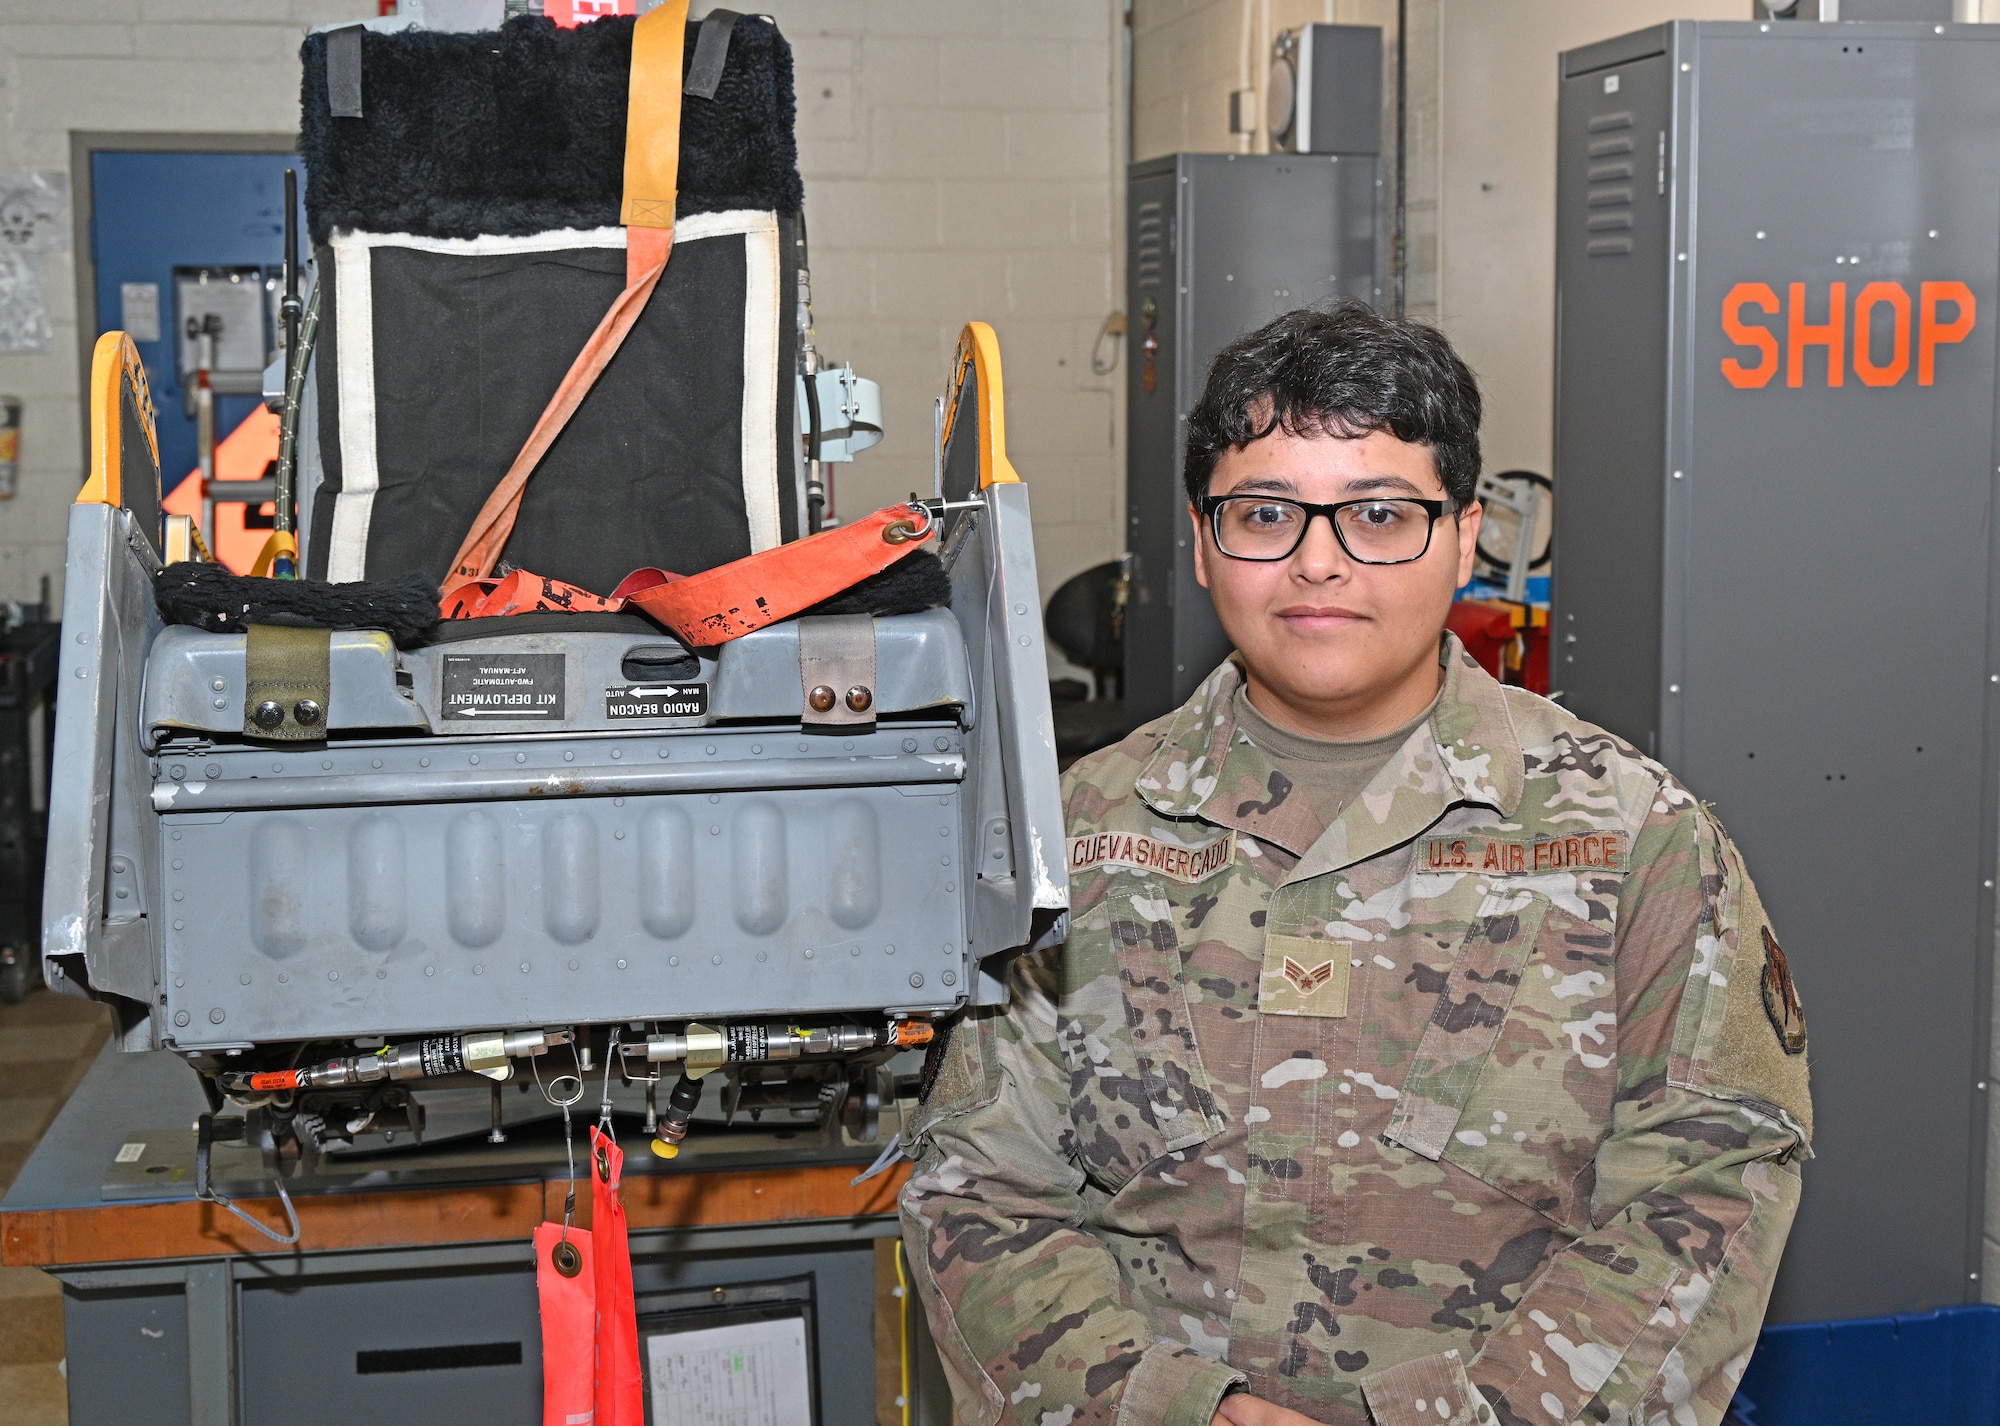 U.S. Air Force Senior Airman Natalia Cuevas Mercado, an egress systems technician with the 175th Maintenance Squadron, poses for a photograph in front of an Advanced Concept Ejection Seat at Warfield Air National Guard Base at Martin State Airport in Middle River, Maryland, October 6, 2022.